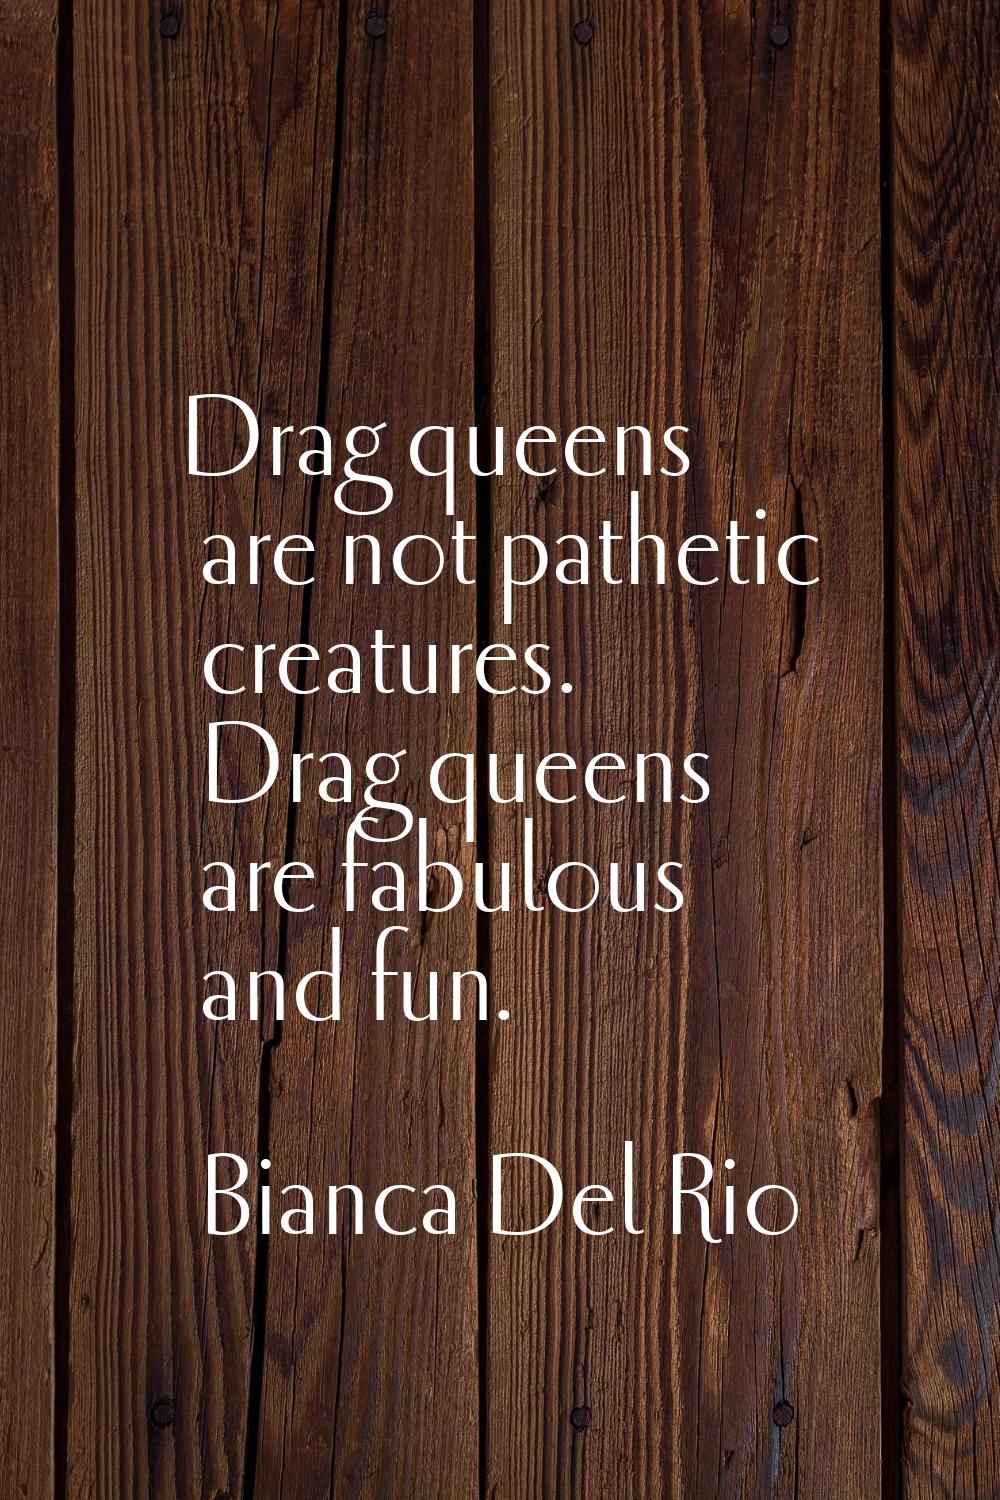 Drag queens are not pathetic creatures. Drag queens are fabulous and fun.